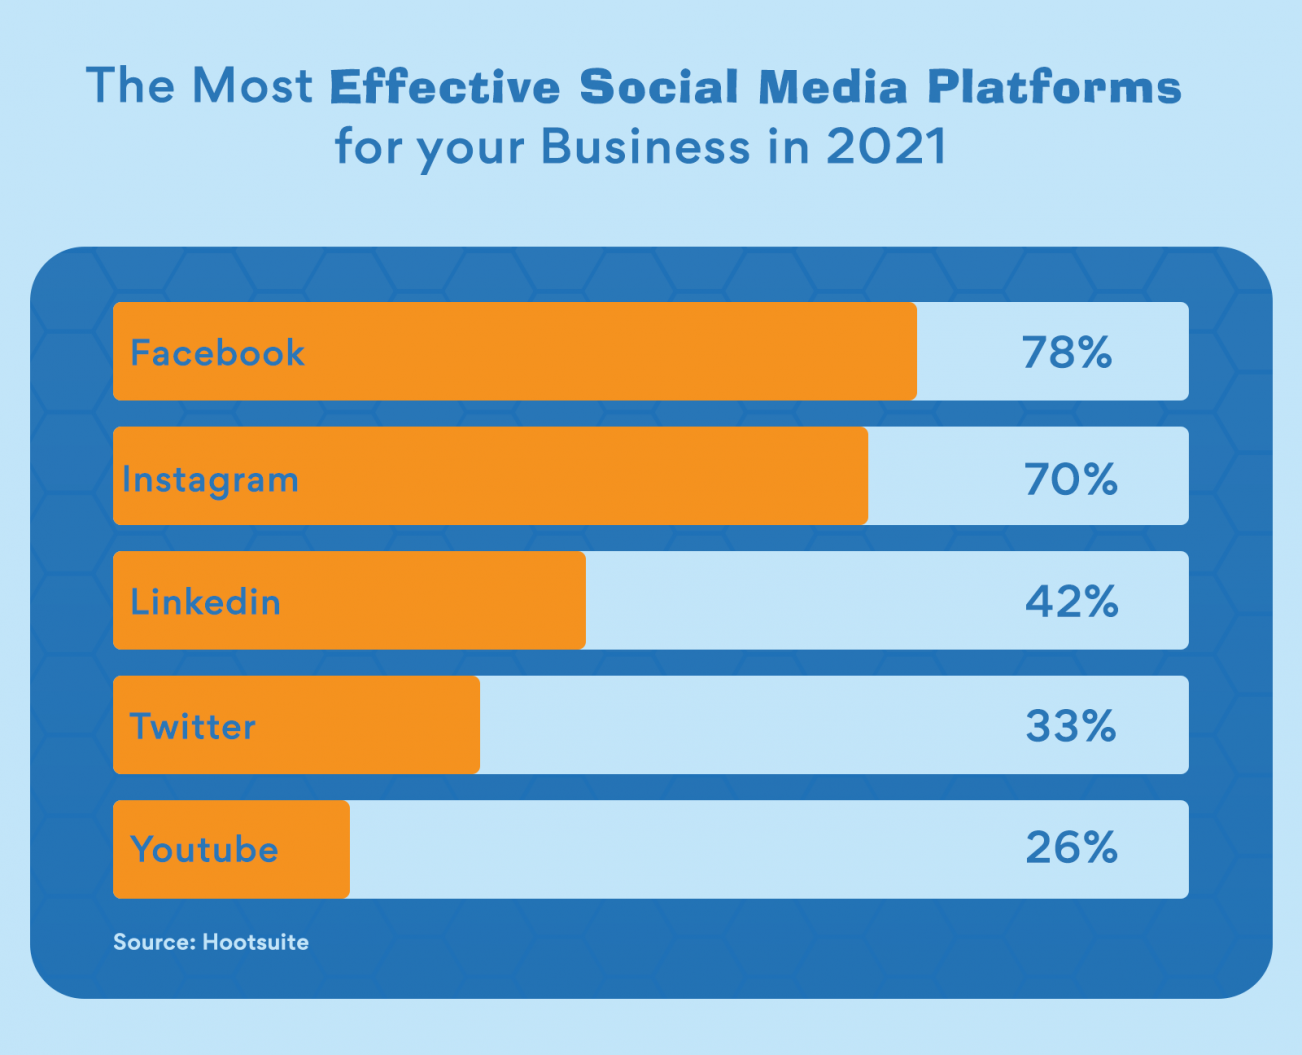 The most effective social media platforms in 2021